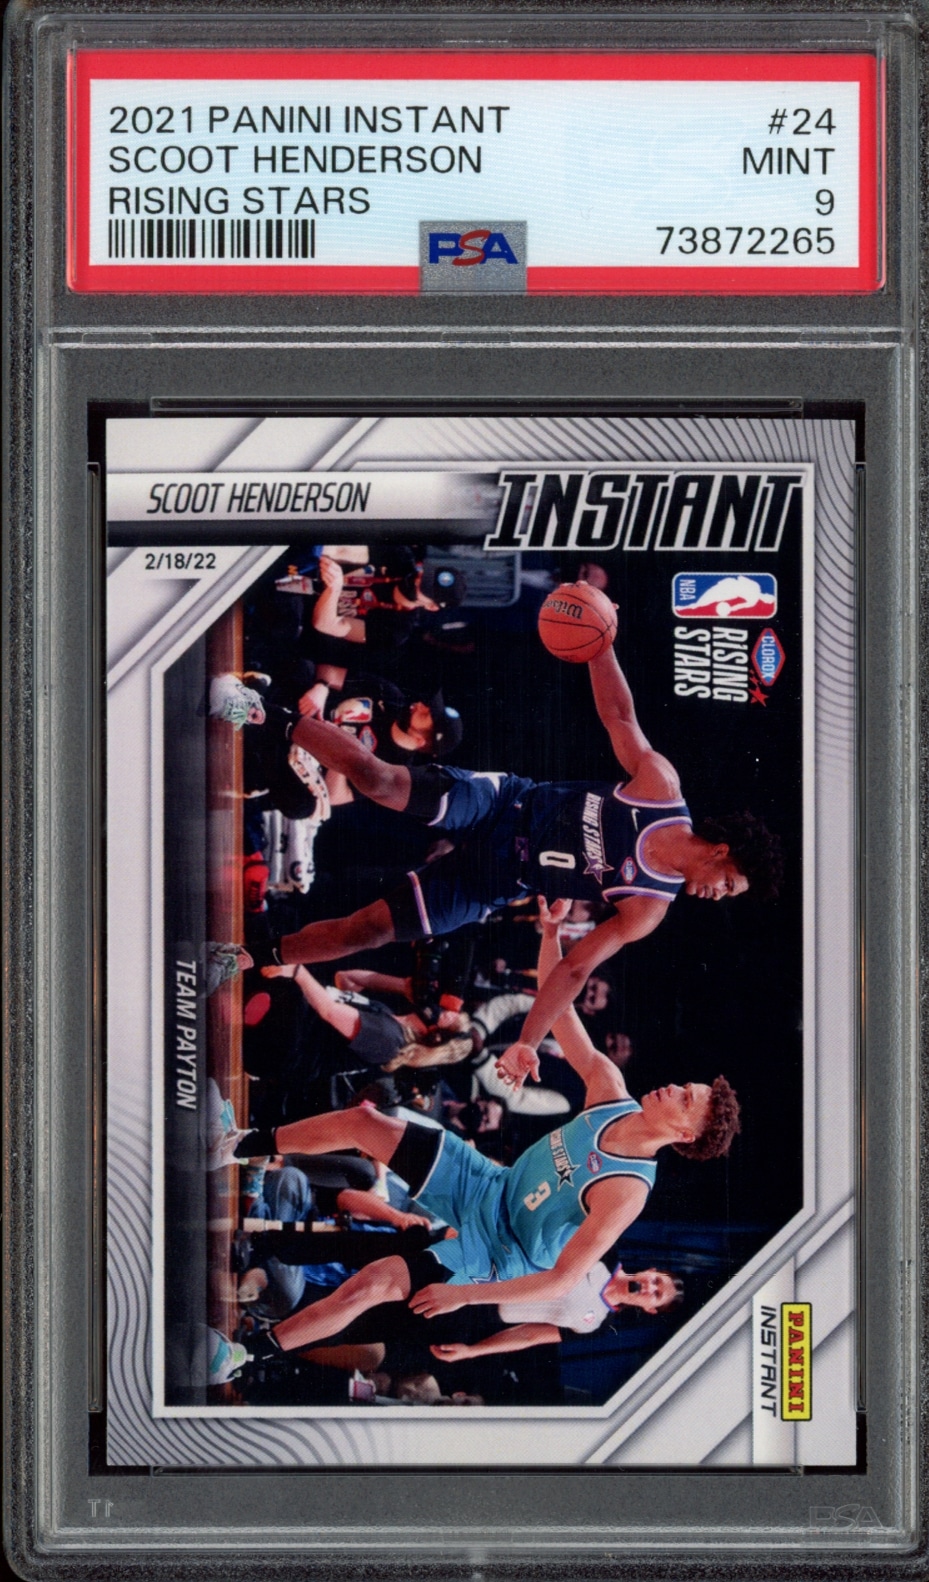 2021 Panini Instant Rising Stars card featuring Scoot Henderson, graded MINT 9 by PSA.